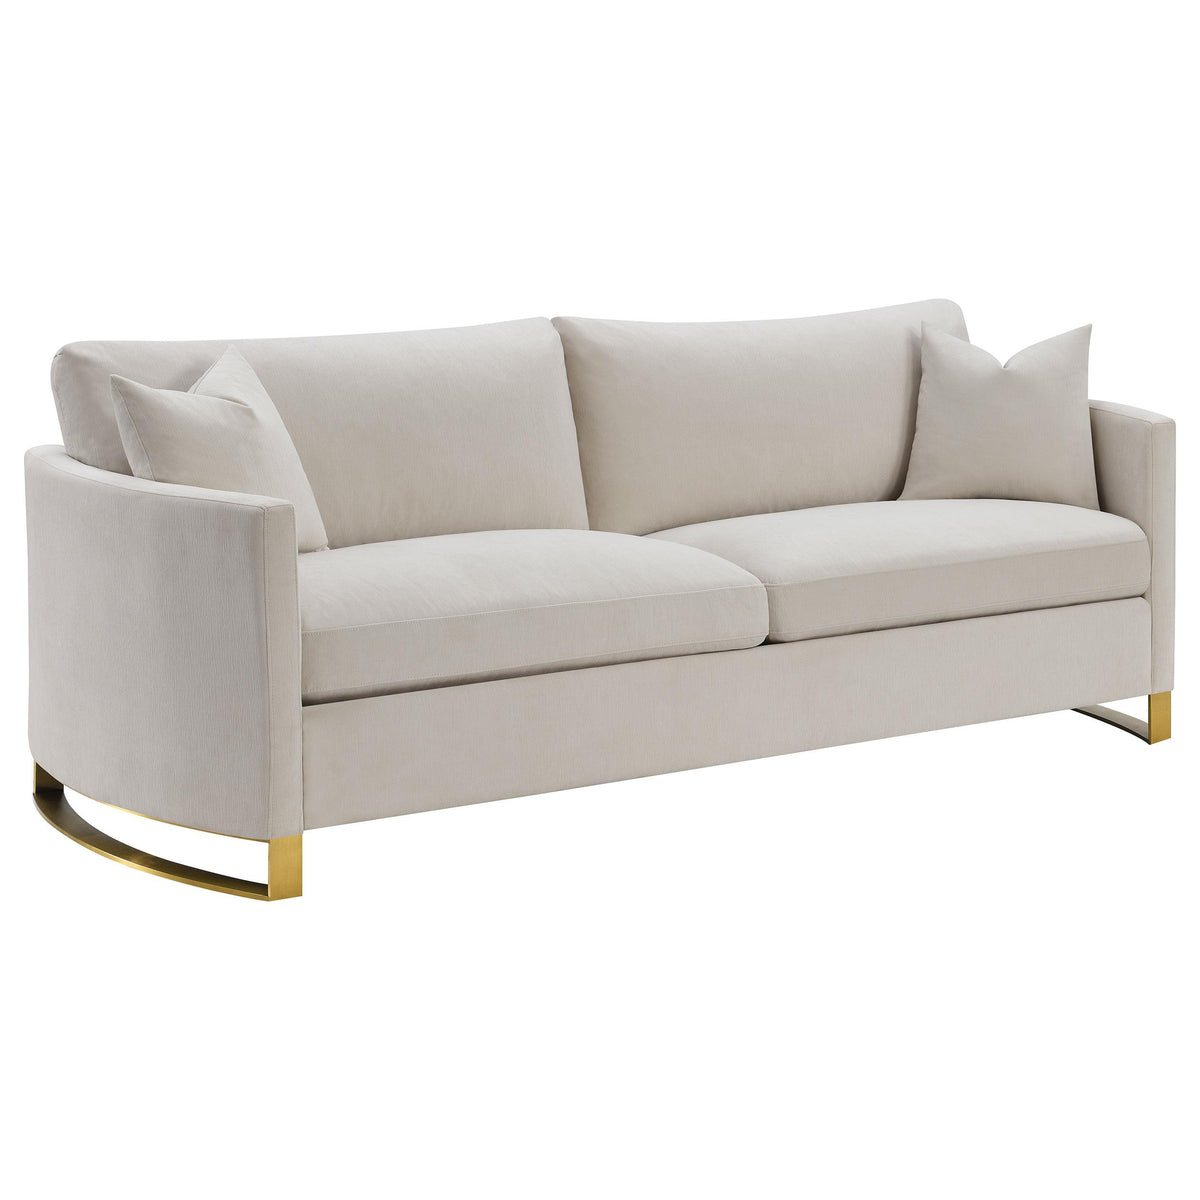 Corliss Upholstered Arched Arms Sofa Beige Corliss Upholstered Arched Arms Sofa Beige Half Price Furniture